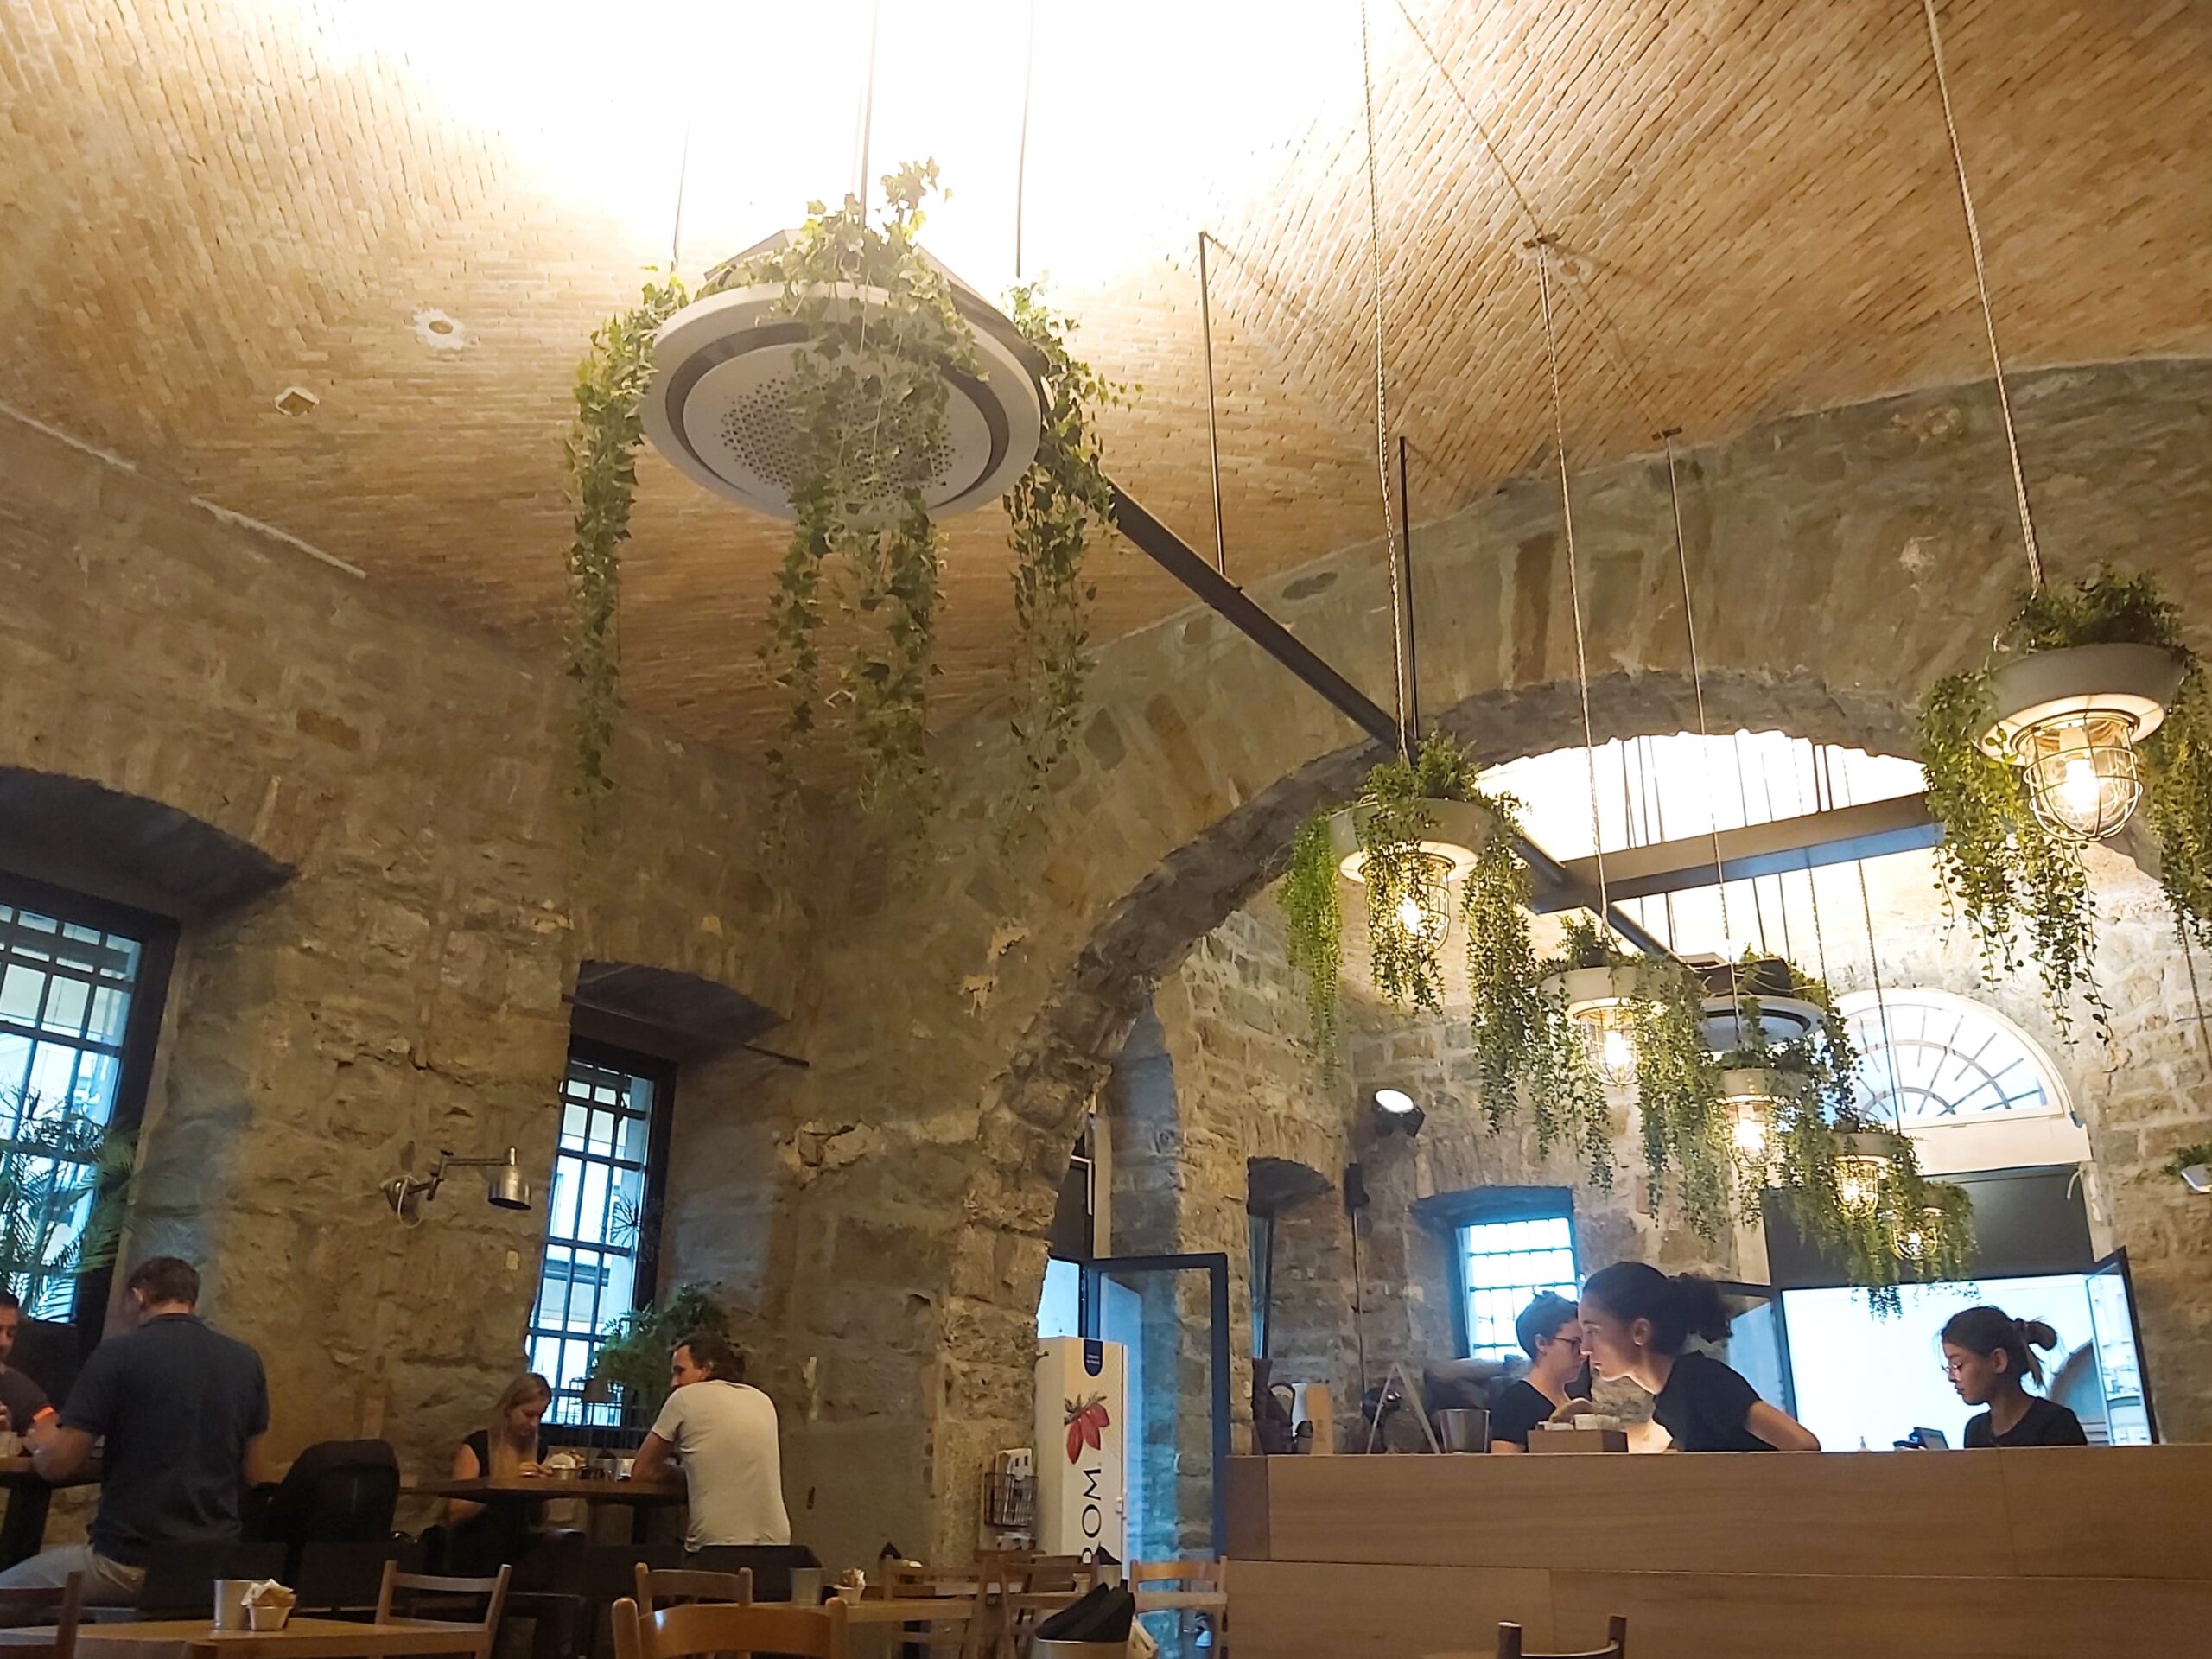 An historic building turned cafe with domed brickwork ceilings, Trieste, Italy